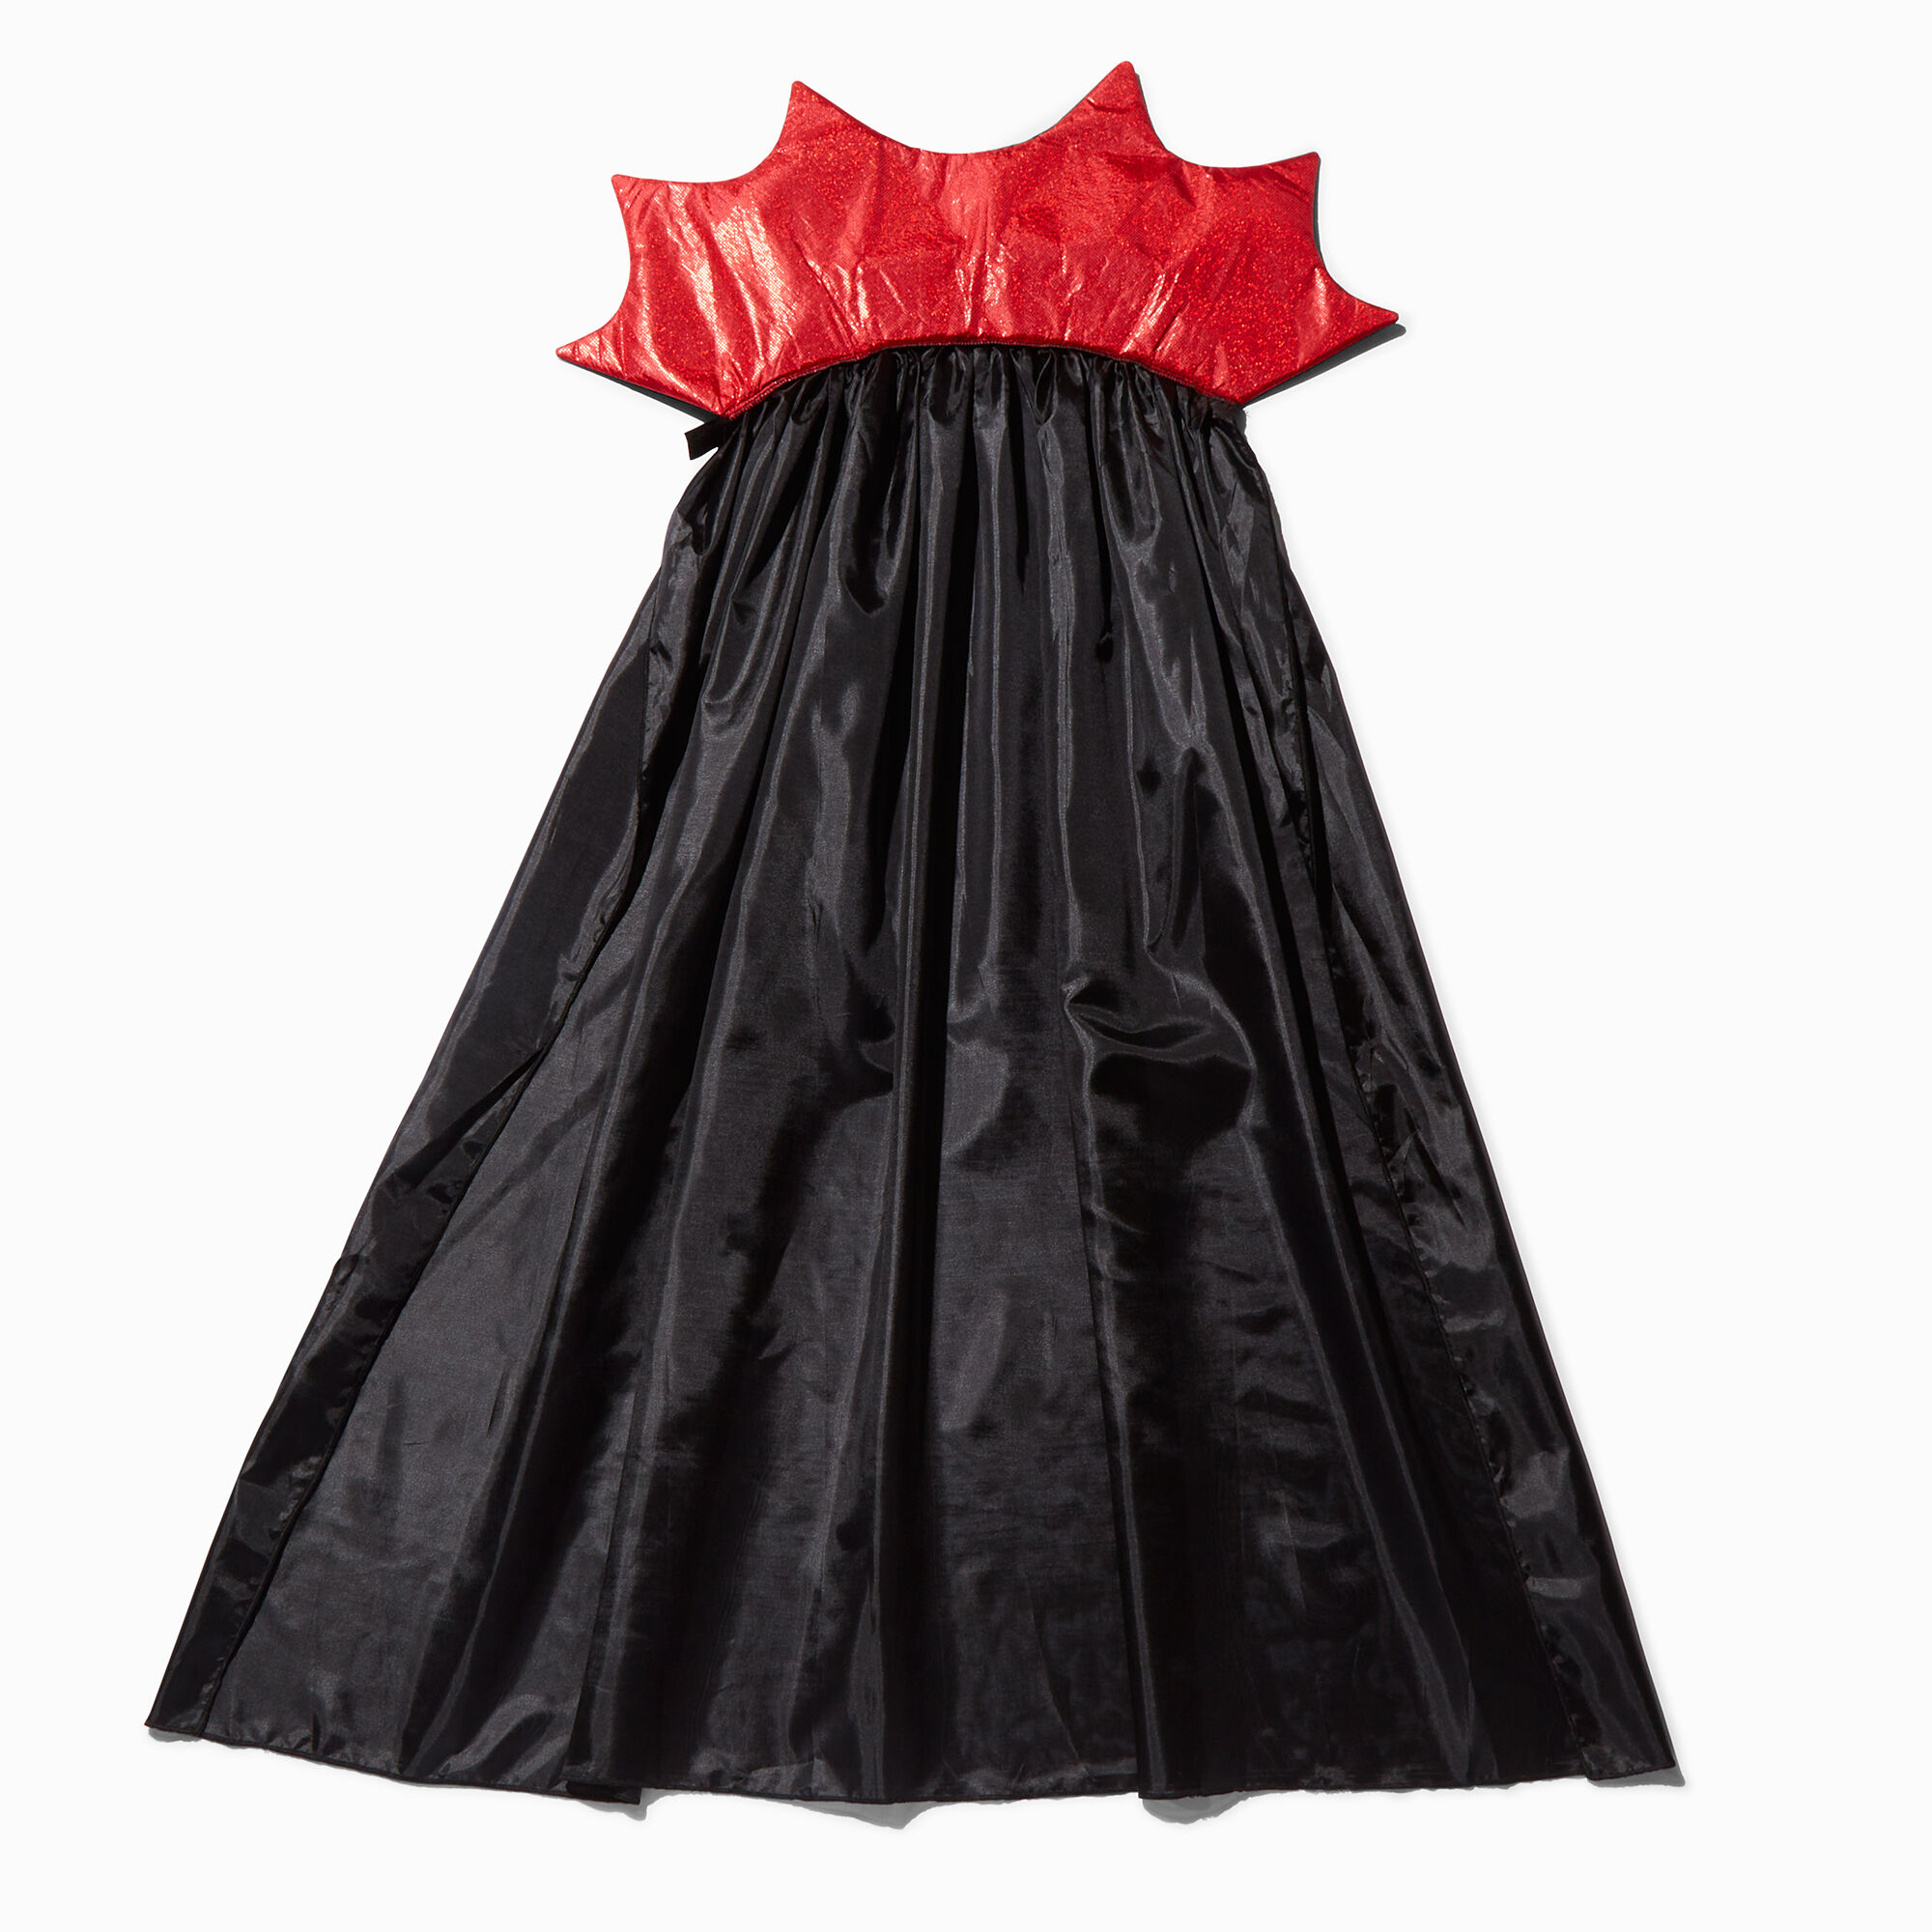 View Claires Black Vampire Cape Red information